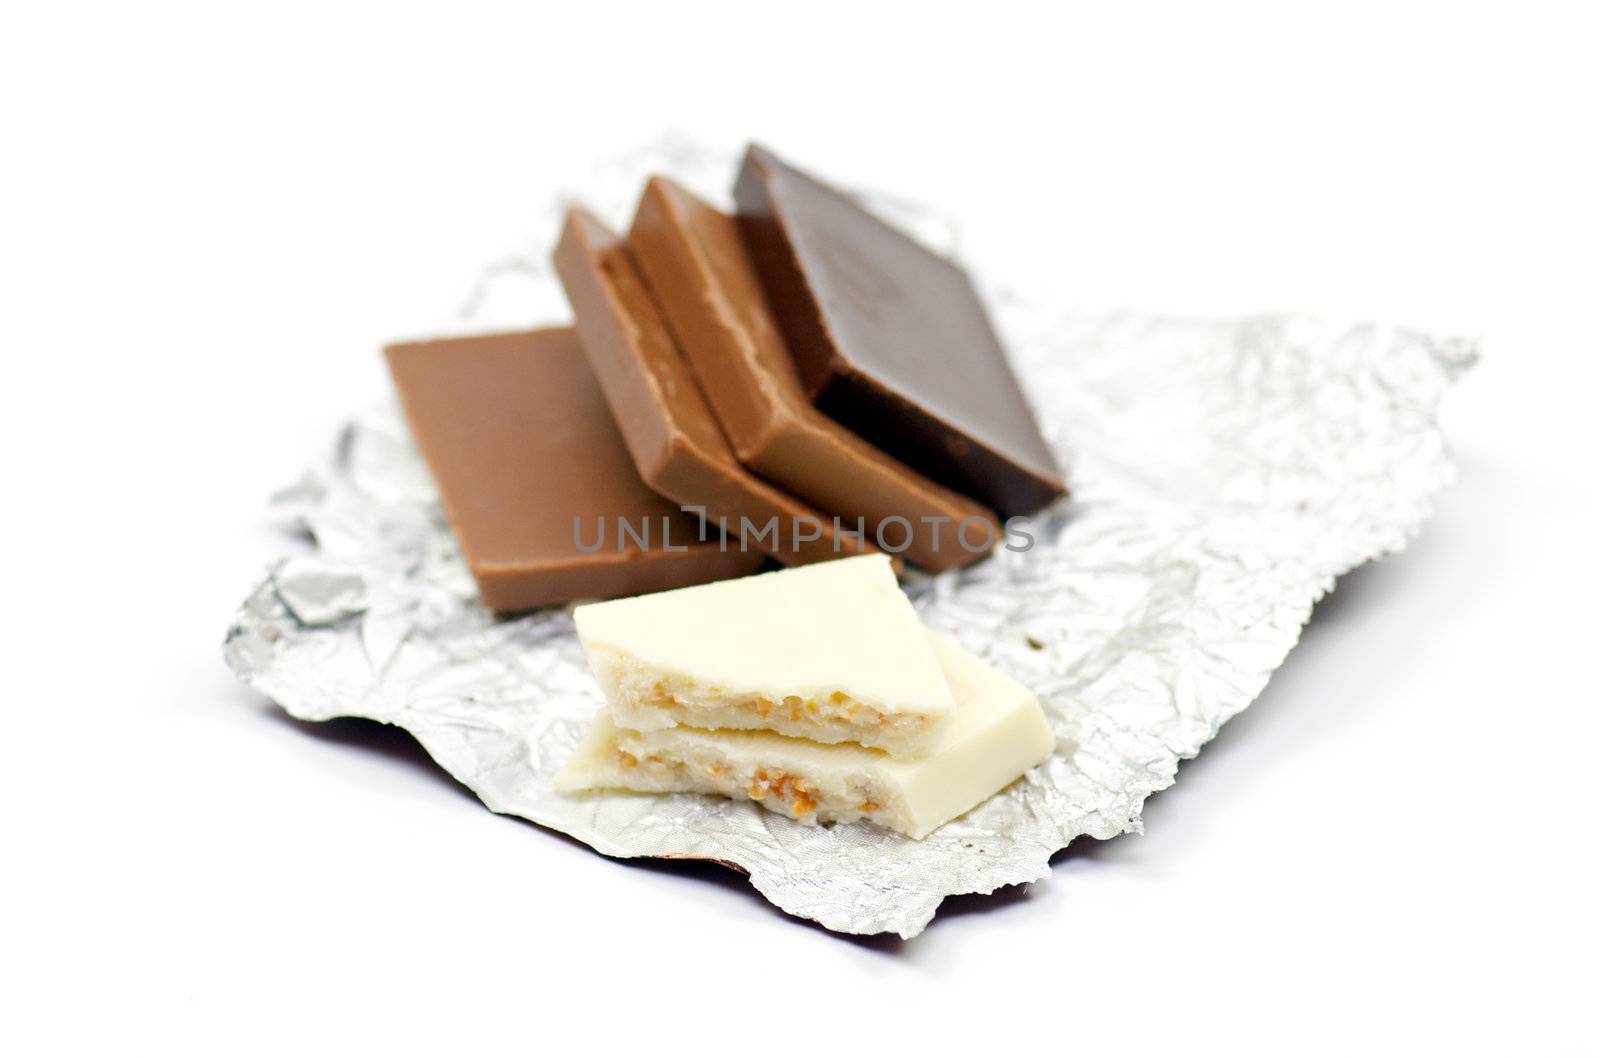 Slices of white, milk and dark chocolate on a foil